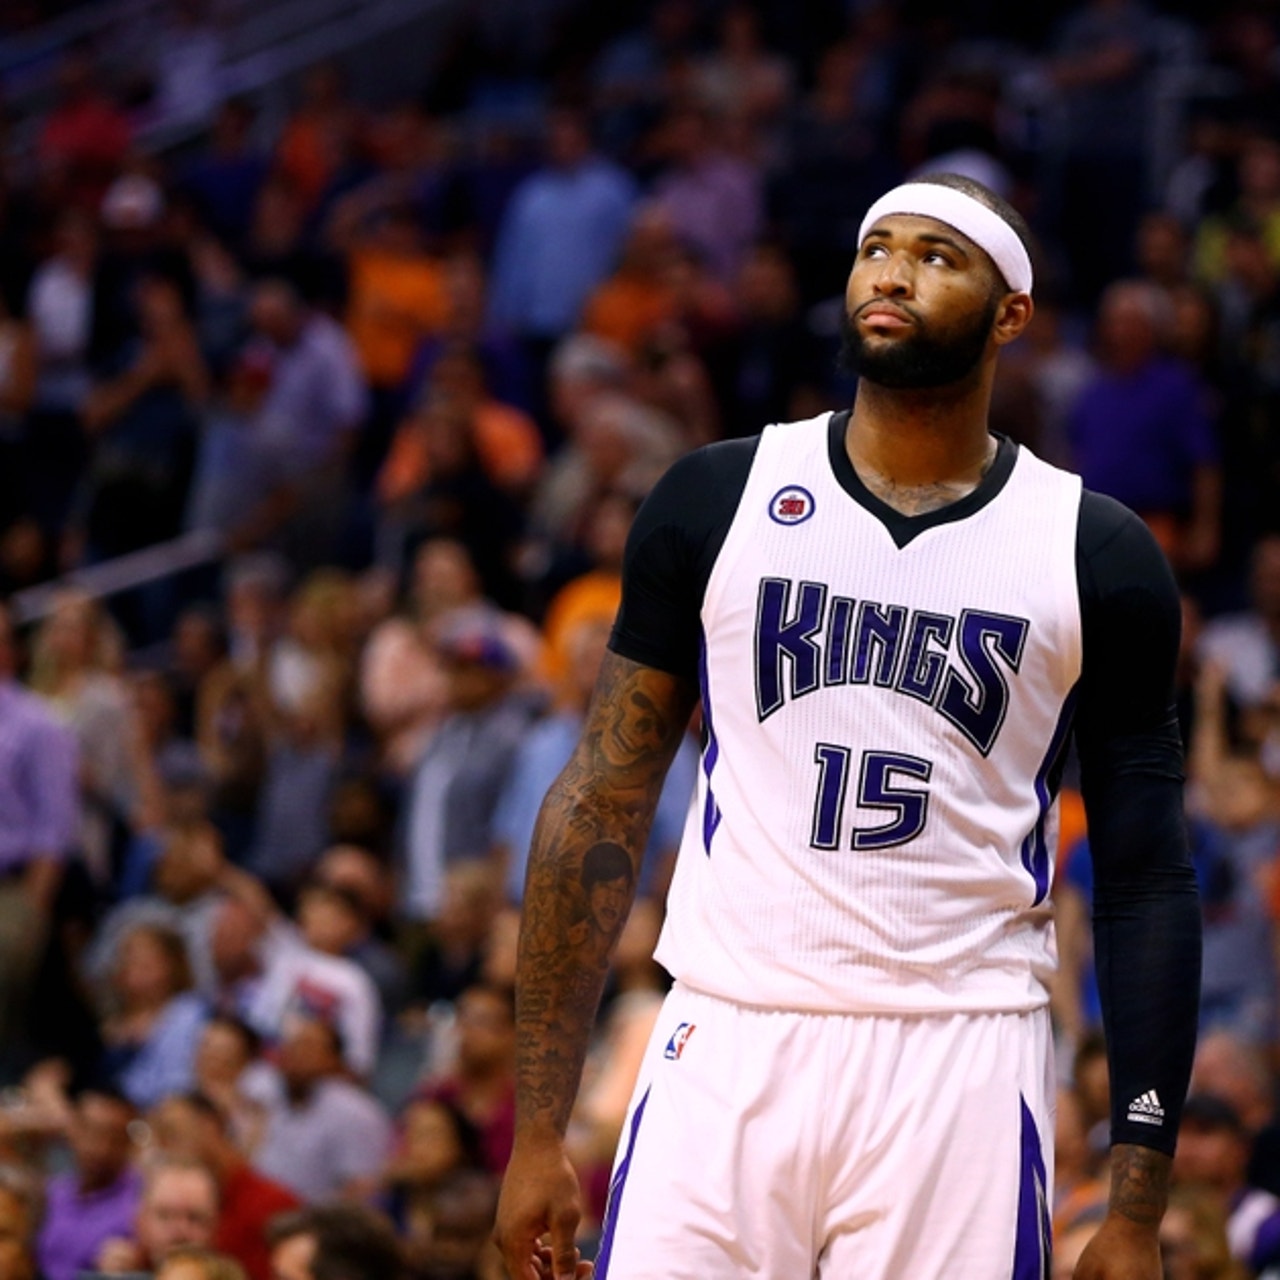 DeMarcus Cousins joins team in Puerto Rican league